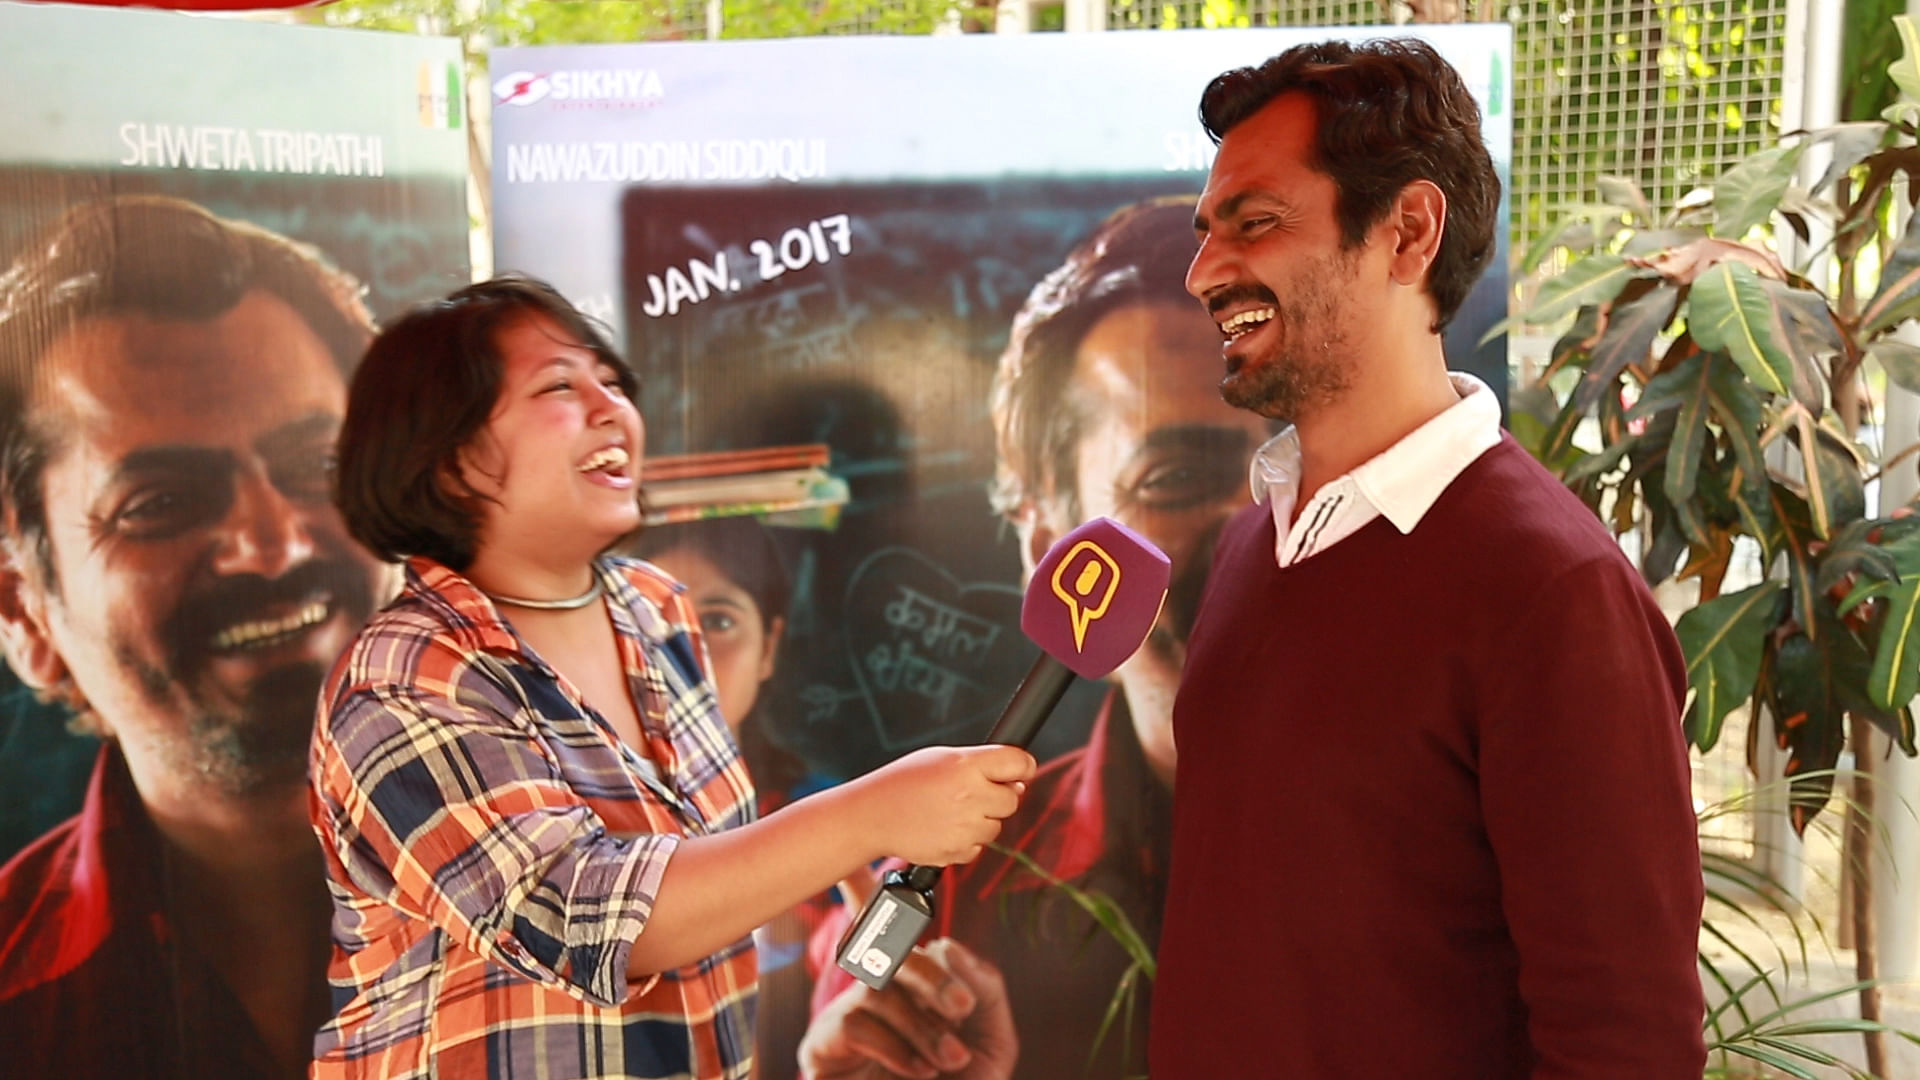 Nawazuddin Siddiqui teaches Abira how to fake laughter. (Photo: The Quint)